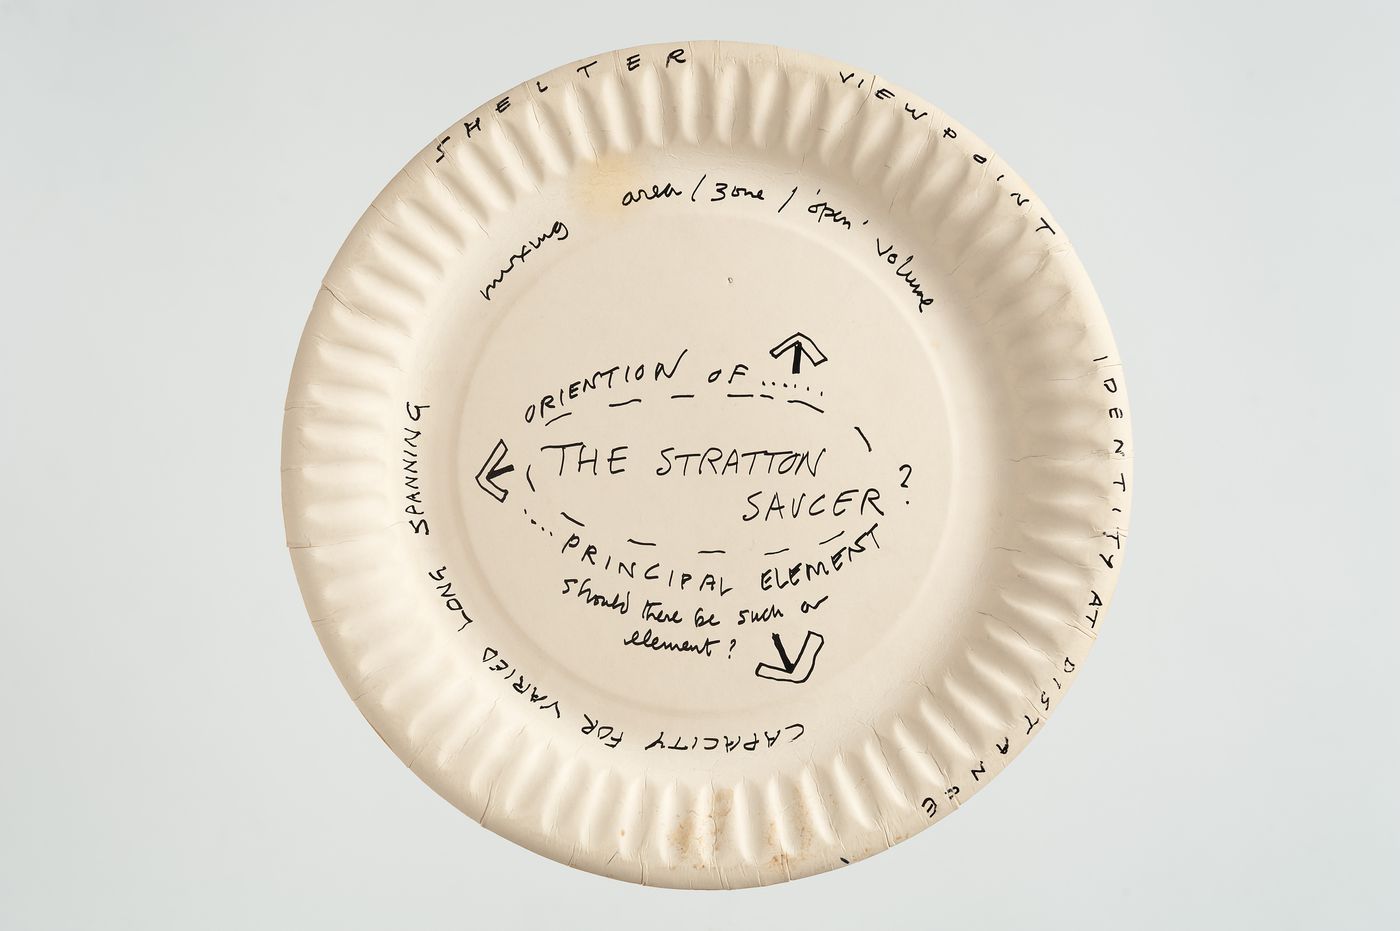 Stratton: preliminary sketch for "The Stratton Saucer" on paper plate